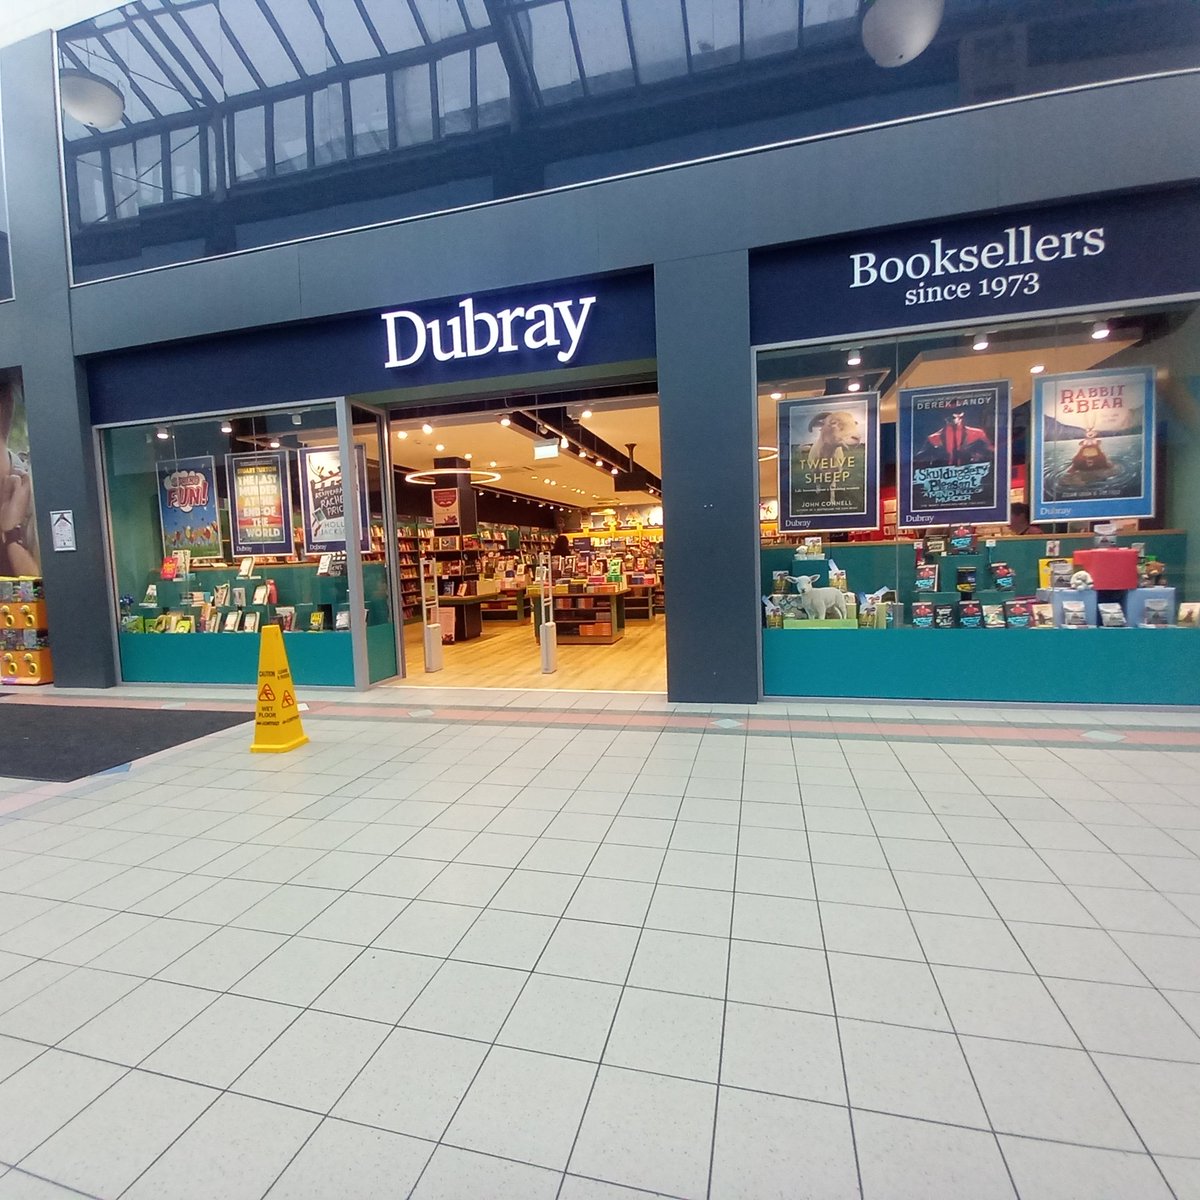 Dubray Bookshop at City Square Shopping Centre 🛍 in #WaterfordCity